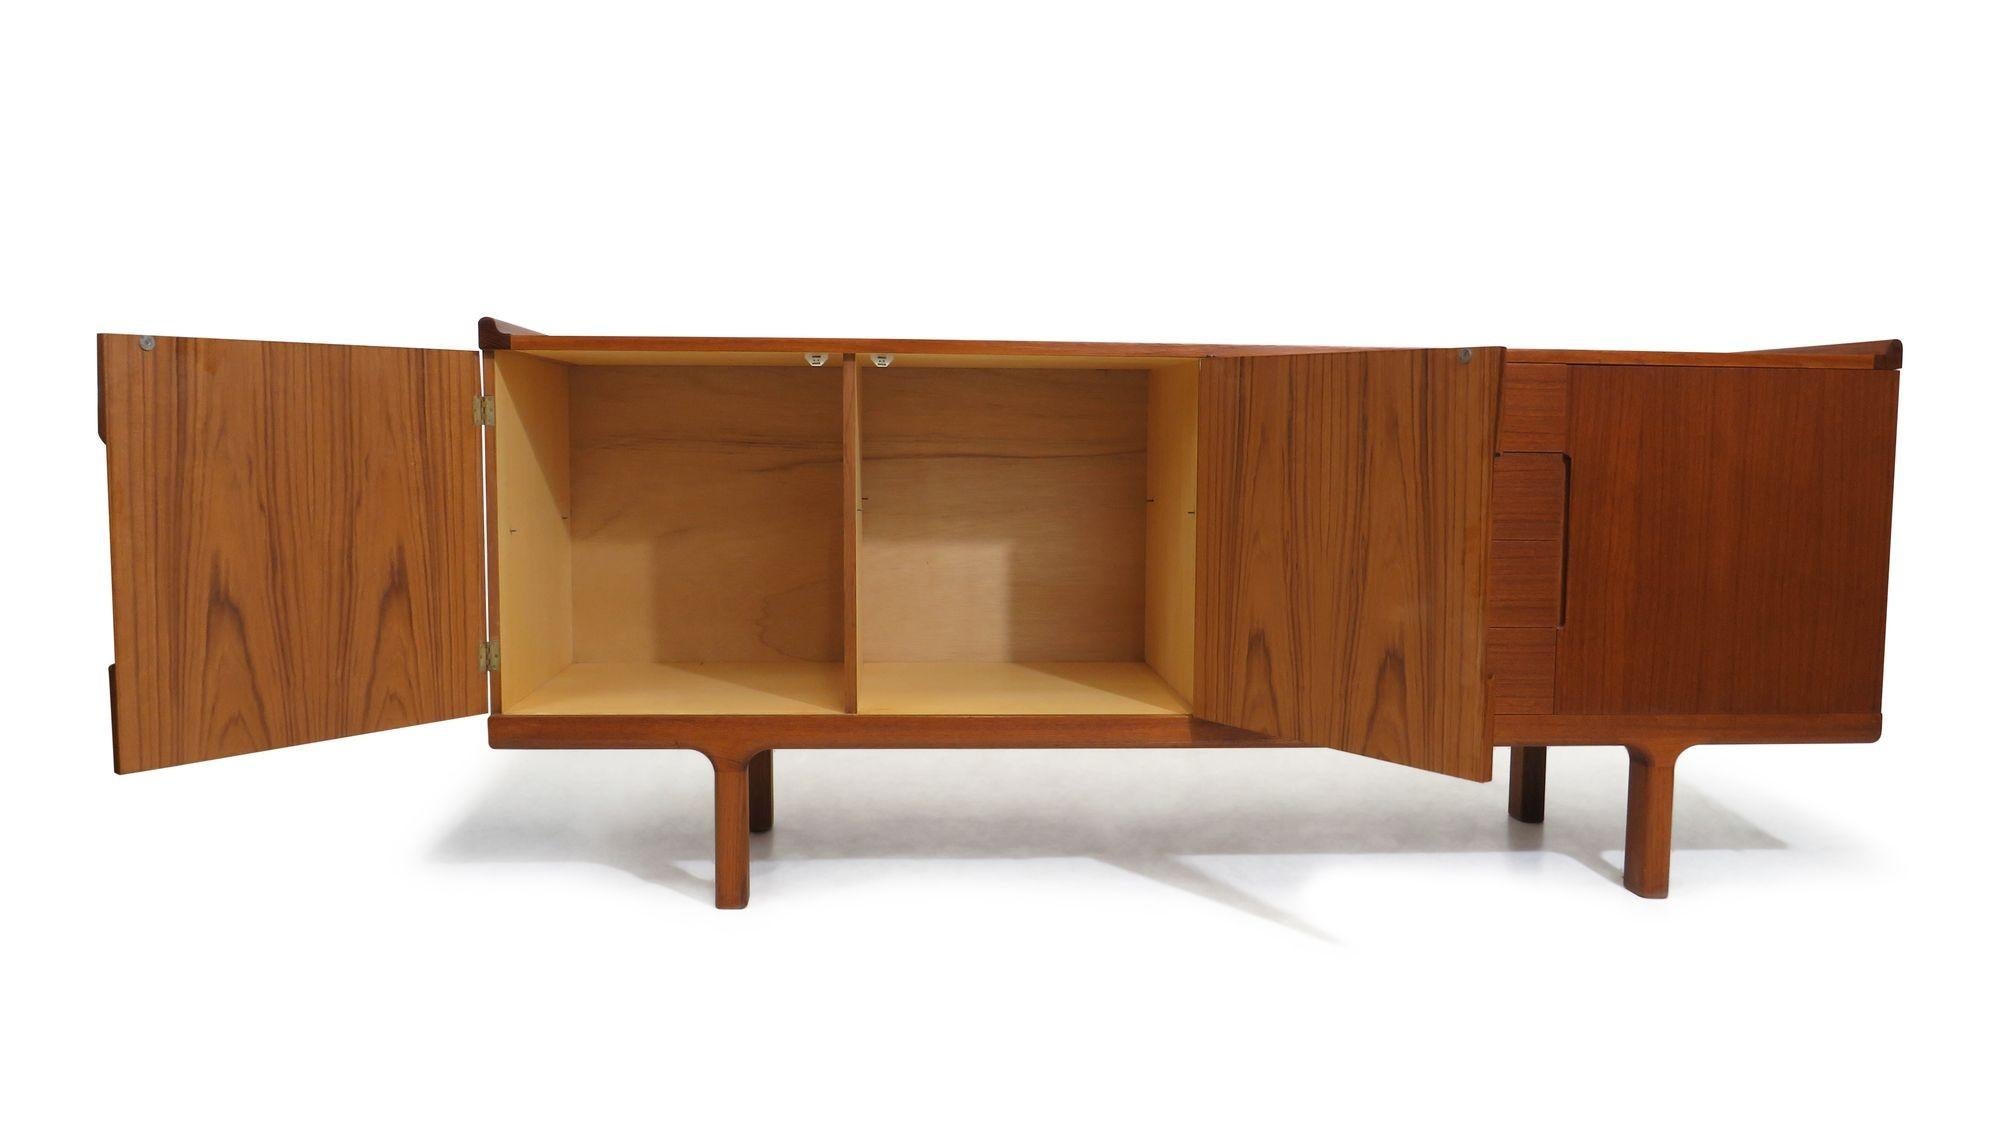 1960's Danish teak credenza crafted of teak with three doors and series of four drawers.
Perfectly restored in a natural oil finish, and in excellent condition.
Measurements
W 78.75'' x D 20.50'' x H 32.12''